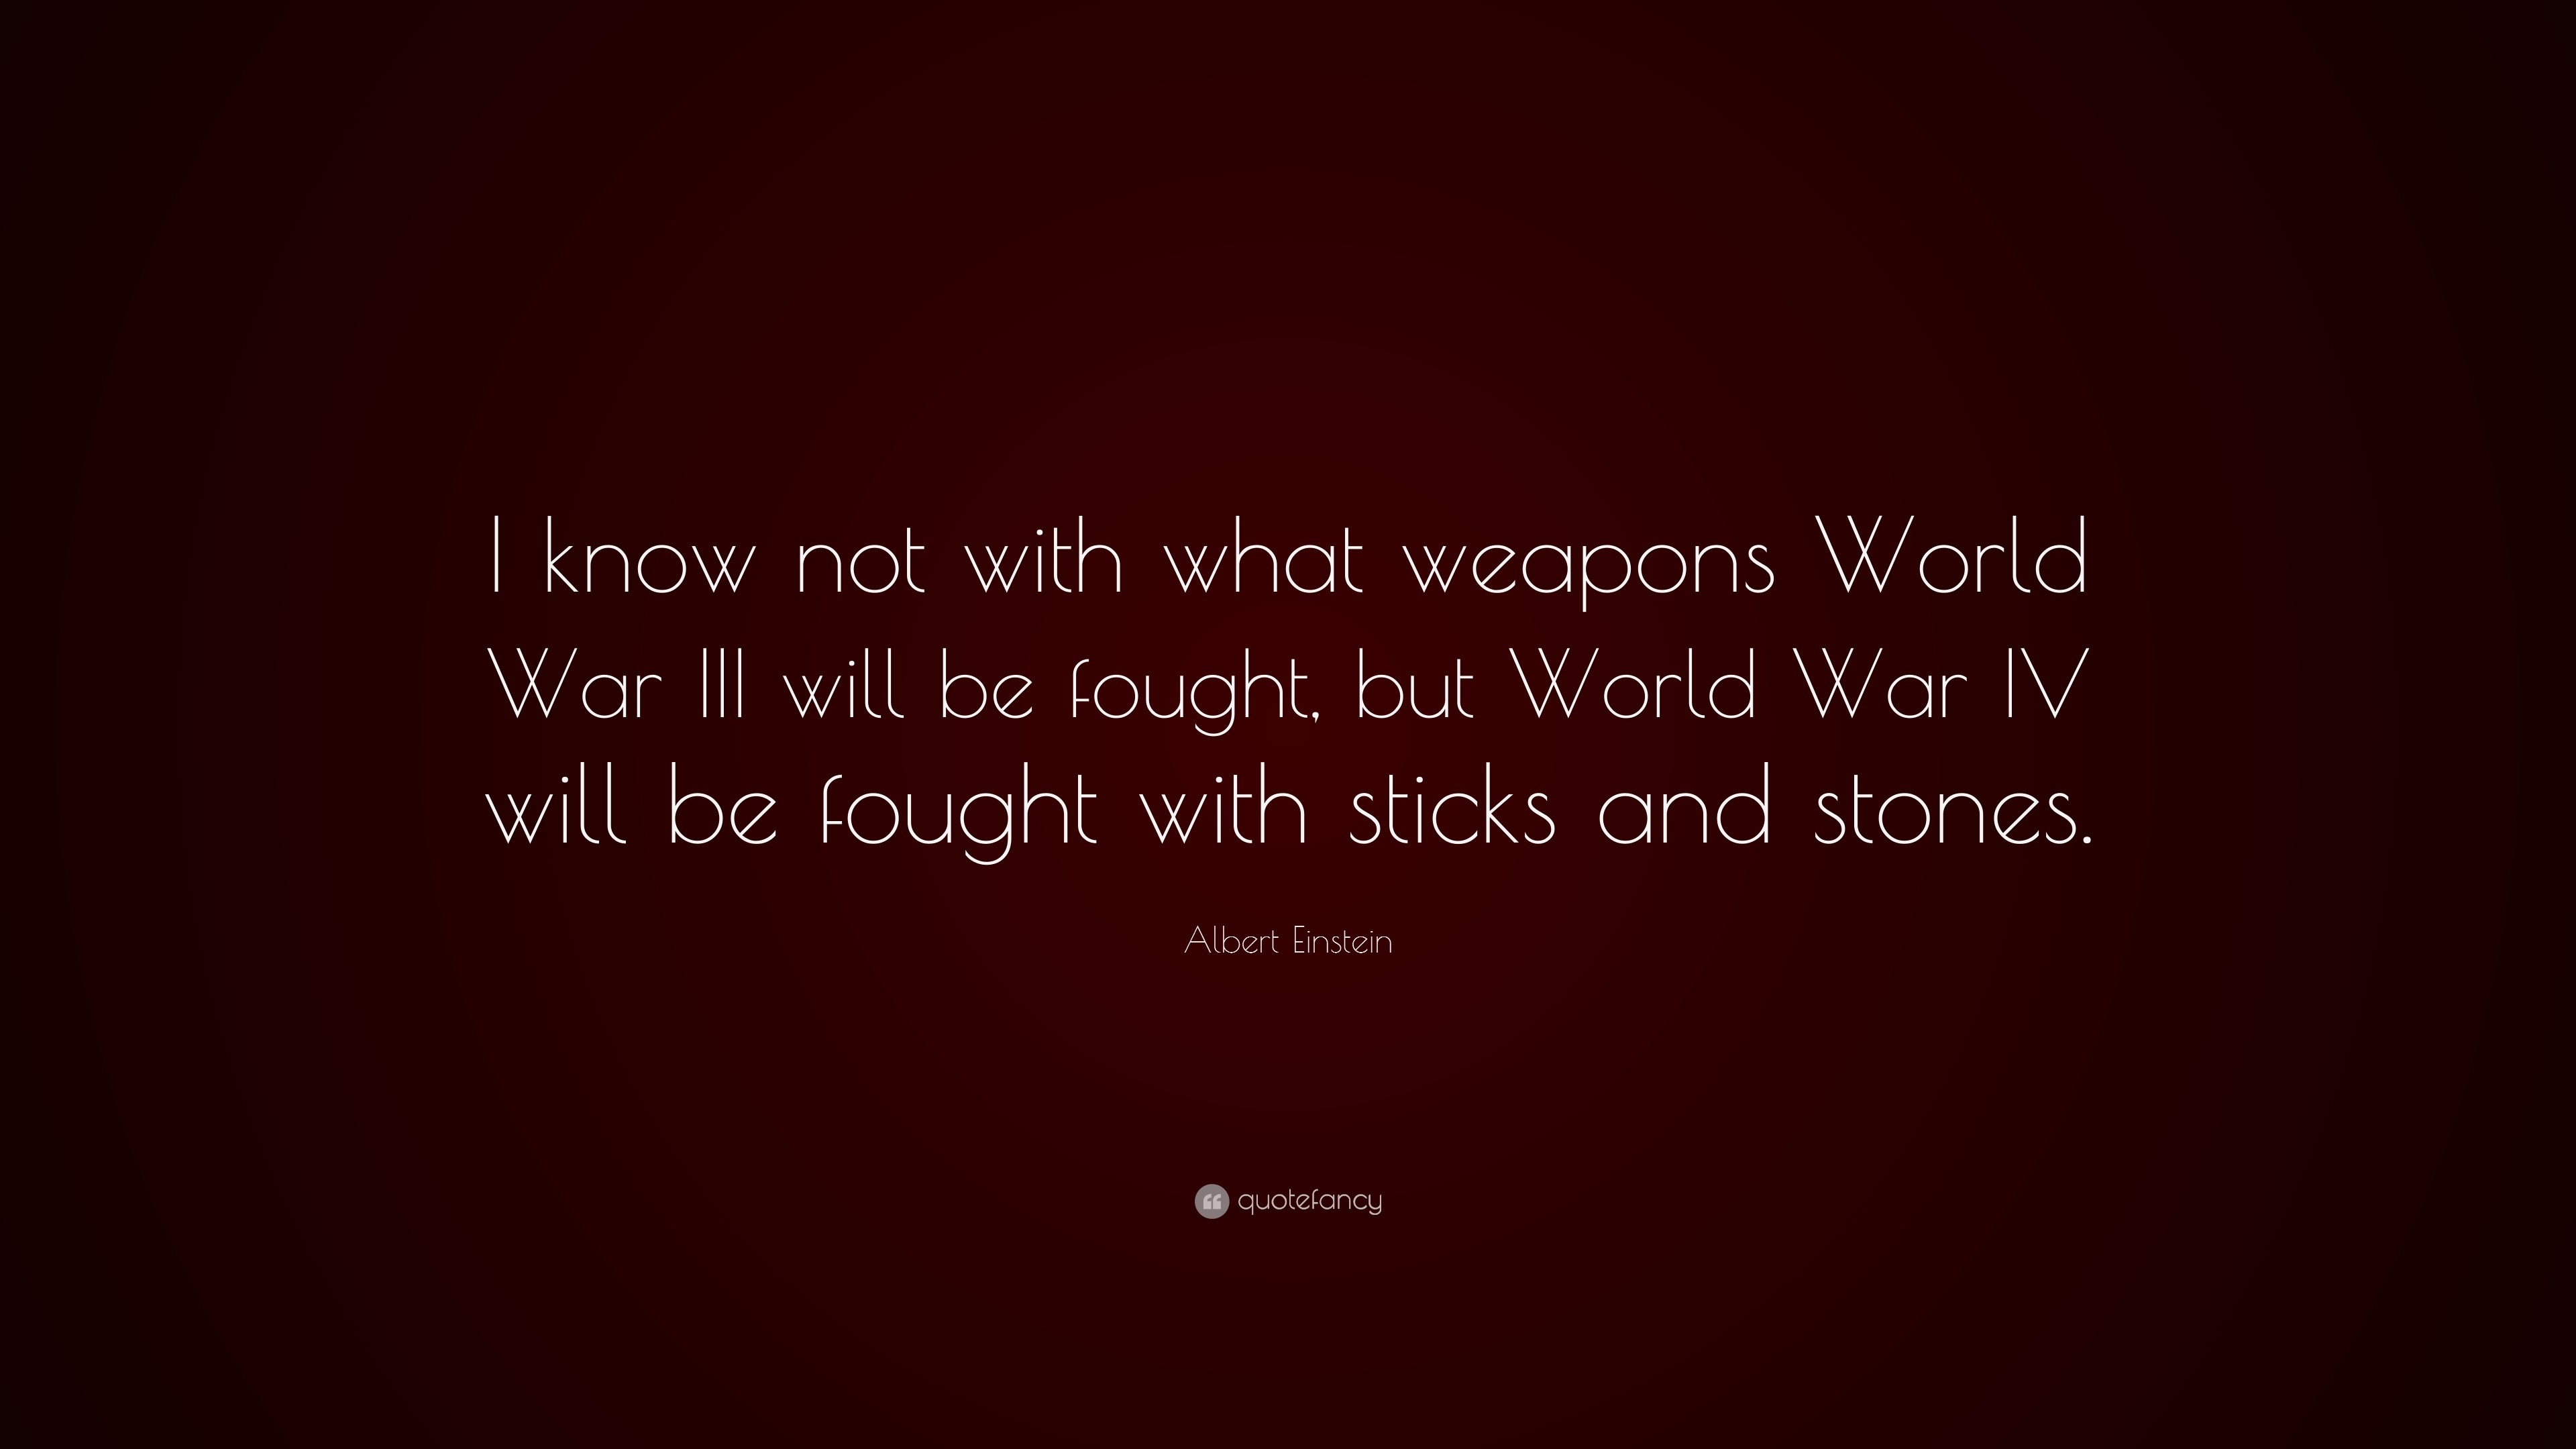 3840x2160 Albert Einstein Quote: “I know not with what weapons World War III will be